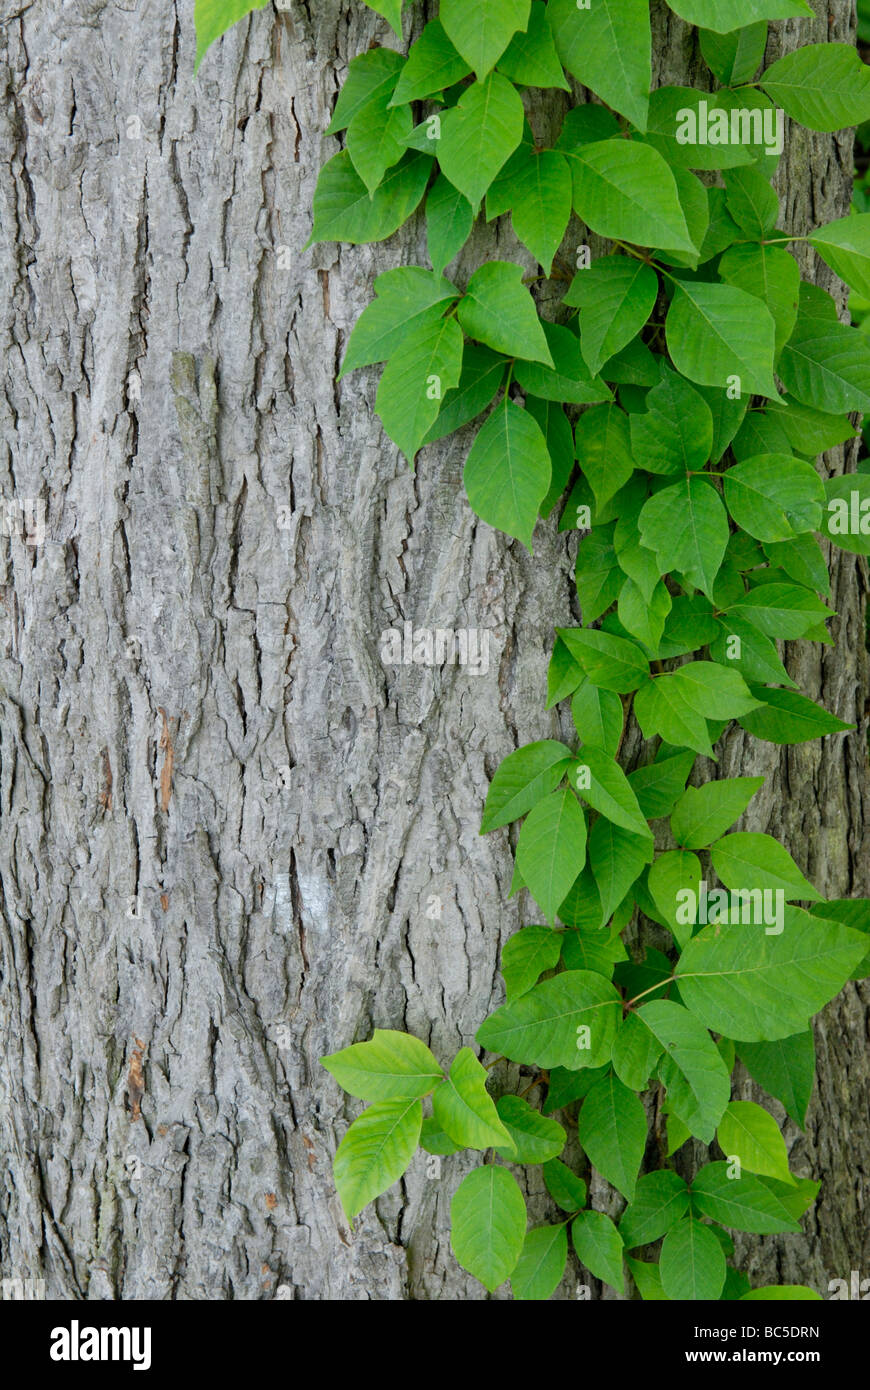 Poison Ivy Toxicodendron radicans. Foto Stock